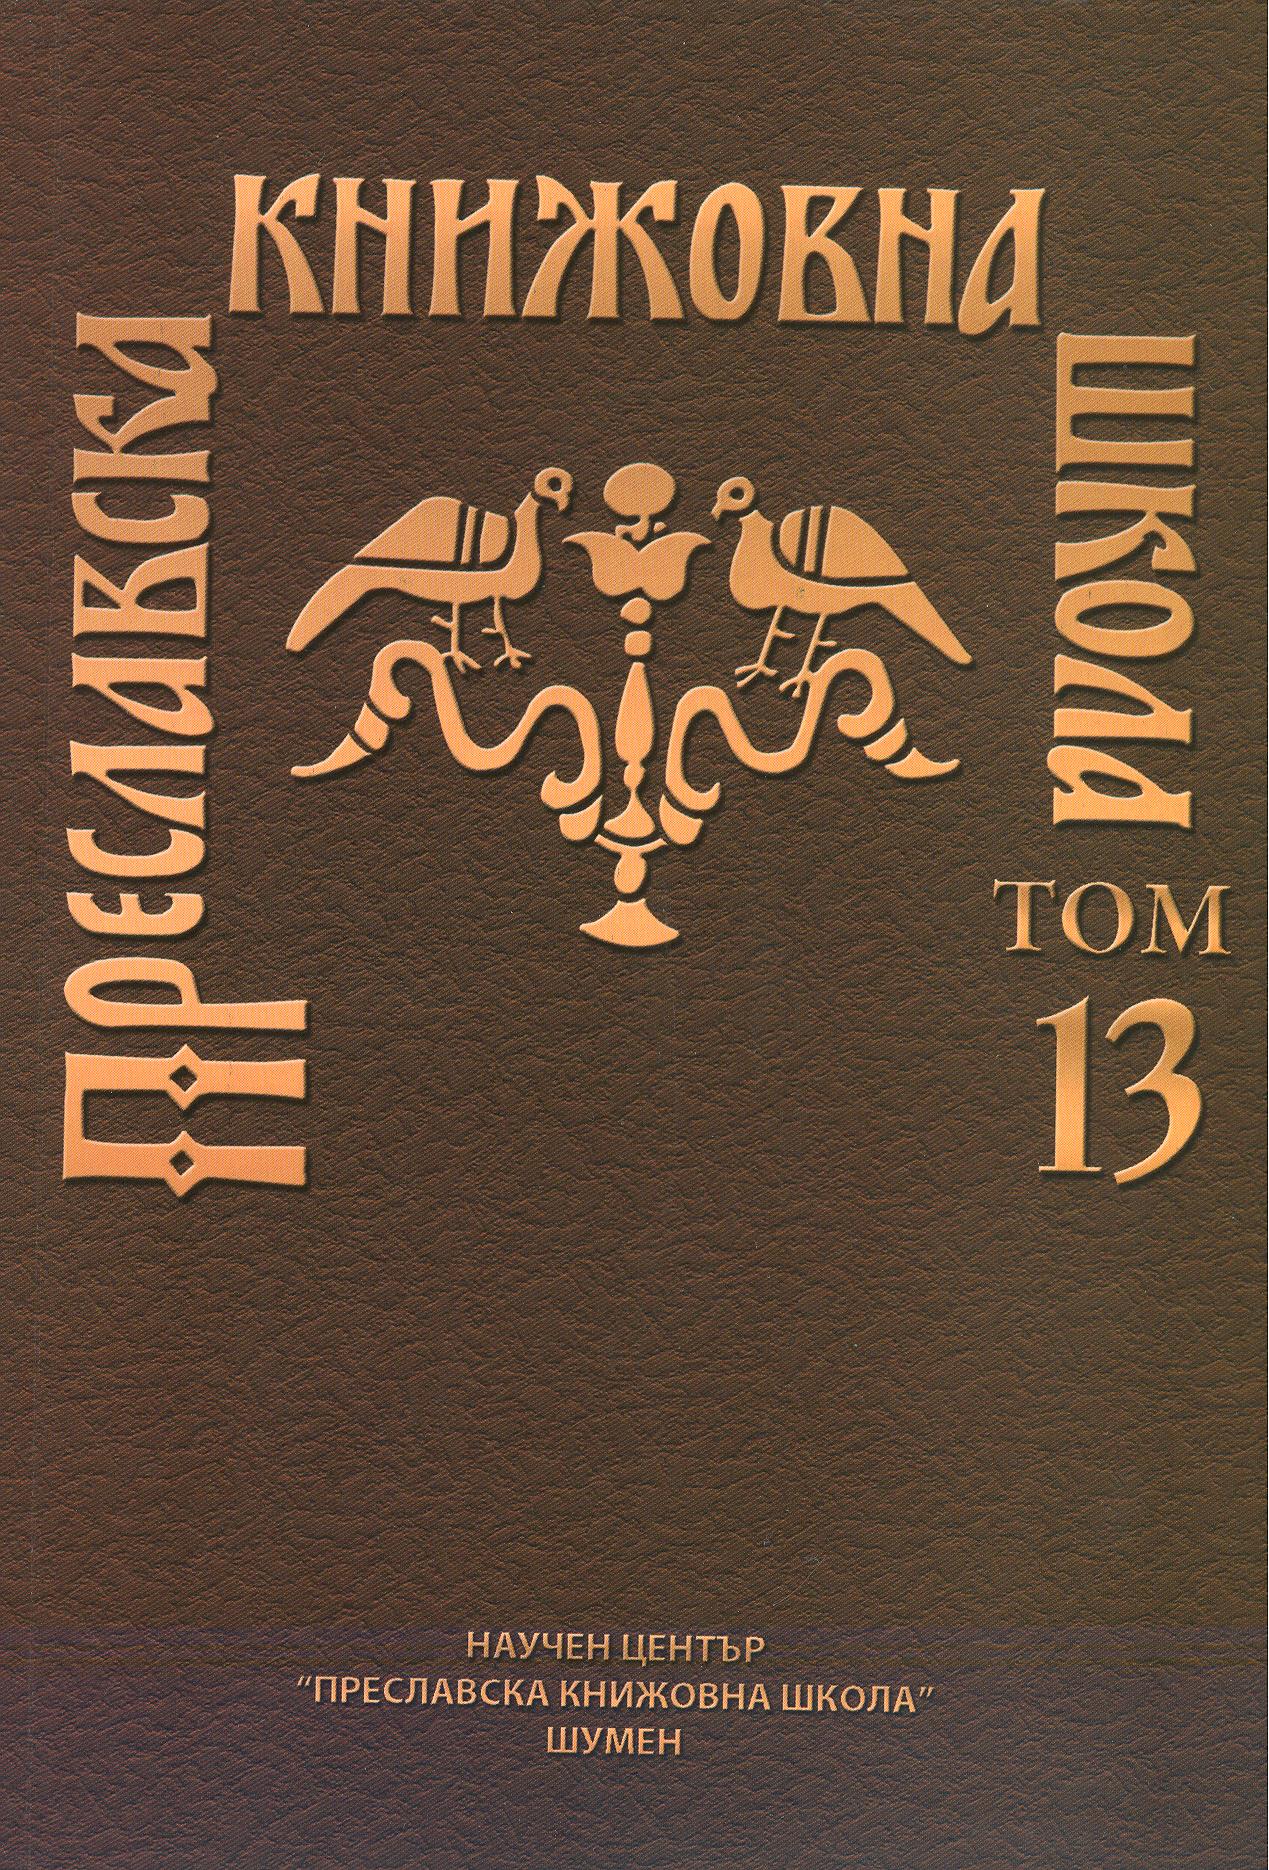 ELEMENTS OF DUALISM IN THE "LIFE OF KODRA" FROM THE RETKOV COMPENDIUM Cover Image